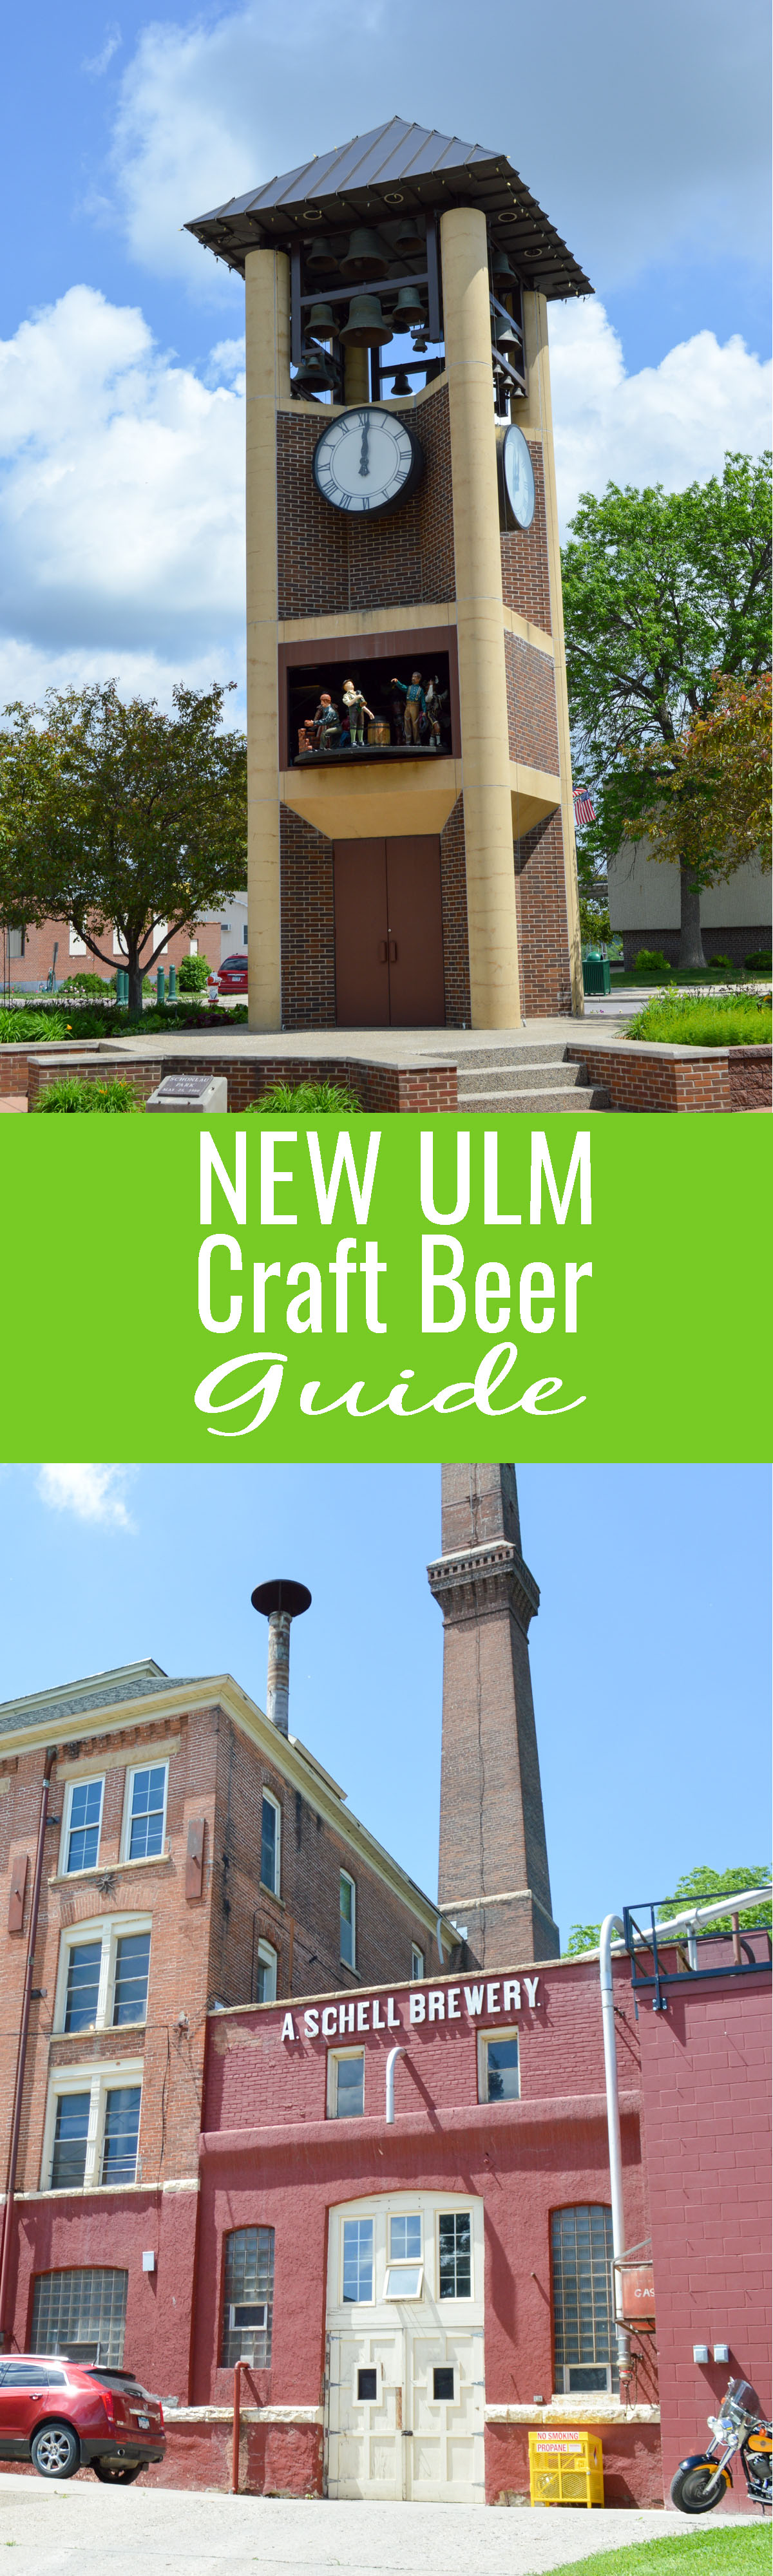 August Schell Brewery in New Ulm, Minnesota is a worthy destination brewery deserving of a day trip from the Twin Cities. There’s also plenty of fun, German heritage to discover!